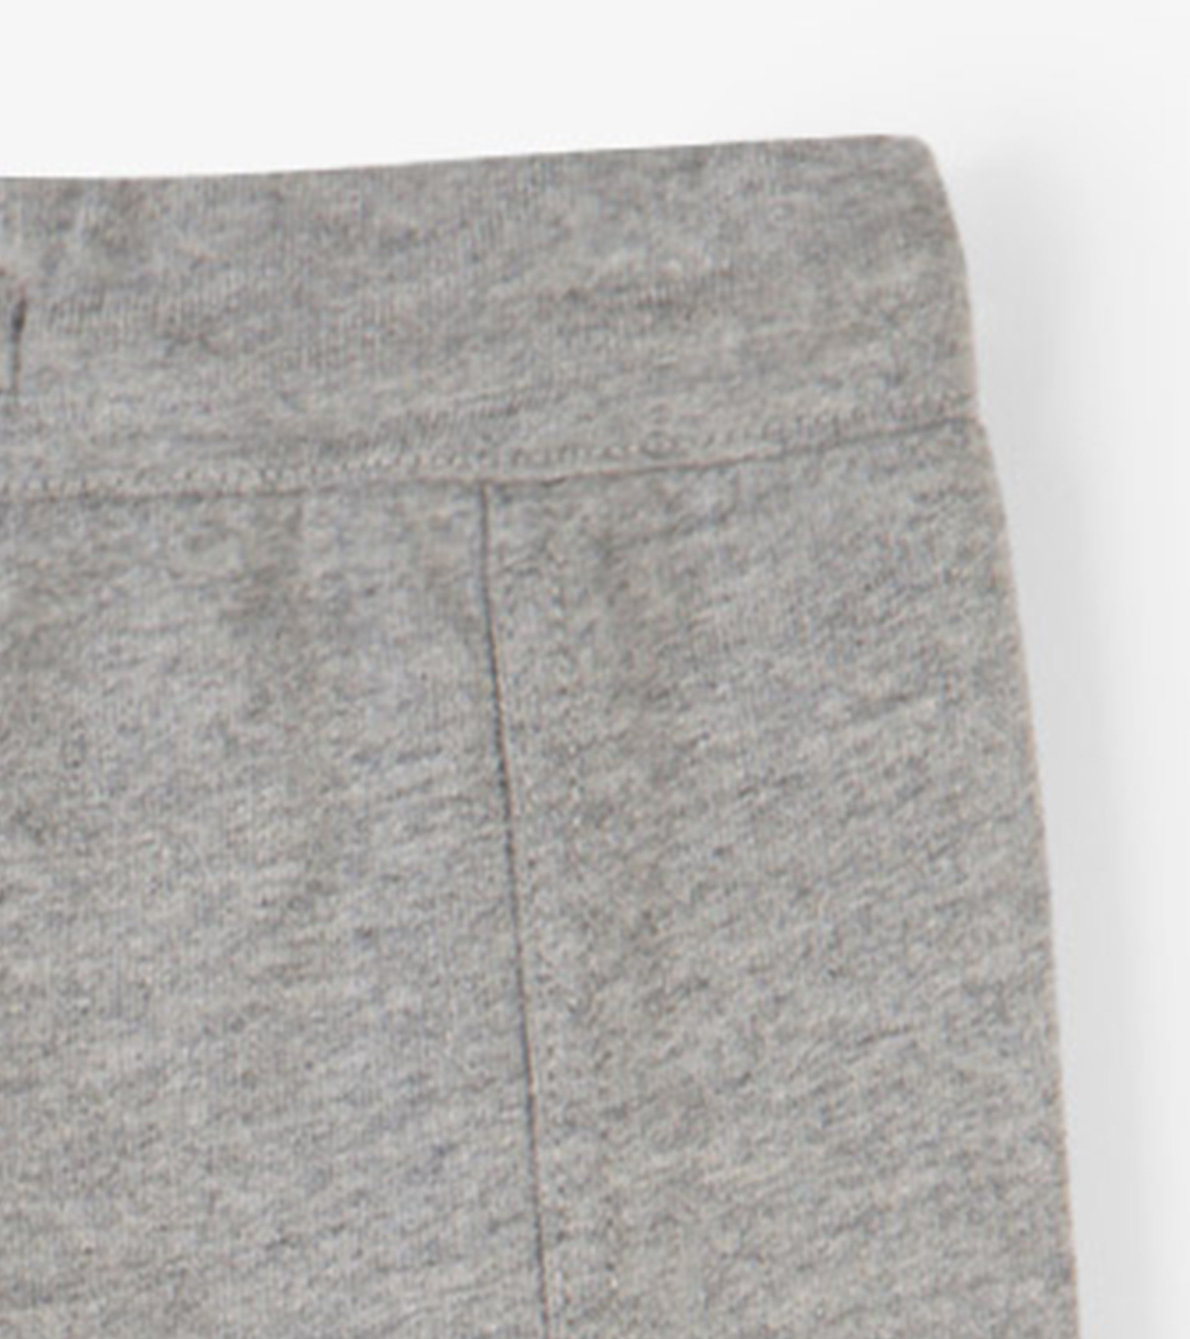 View larger image of Boys Grey Cargo Joggers